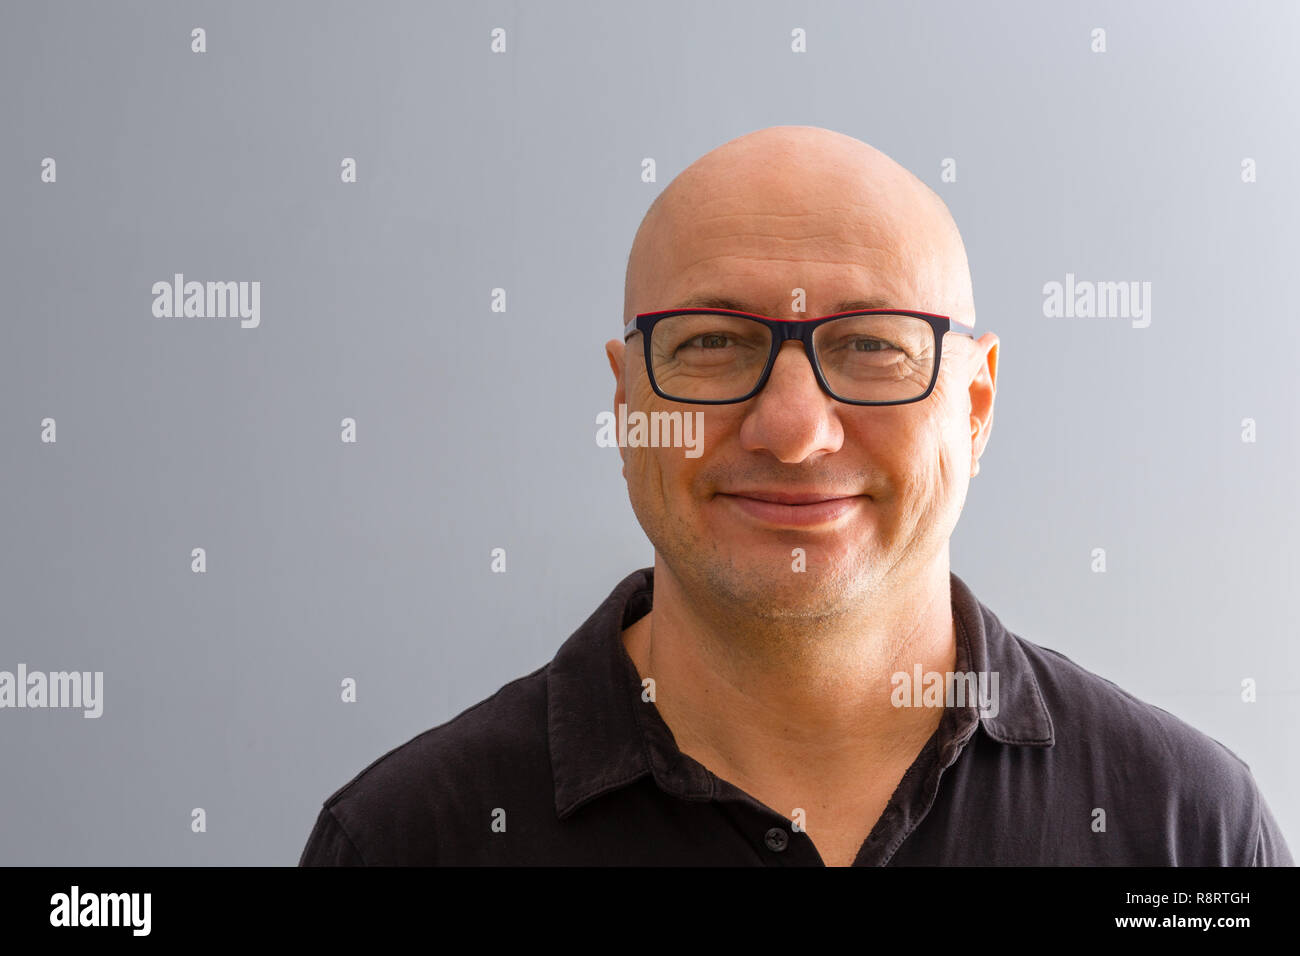 Bust frontal portrait of smiling bold adult man in glasses, wearing black shirt and standing against smooth grey background with copy space Stock Photo